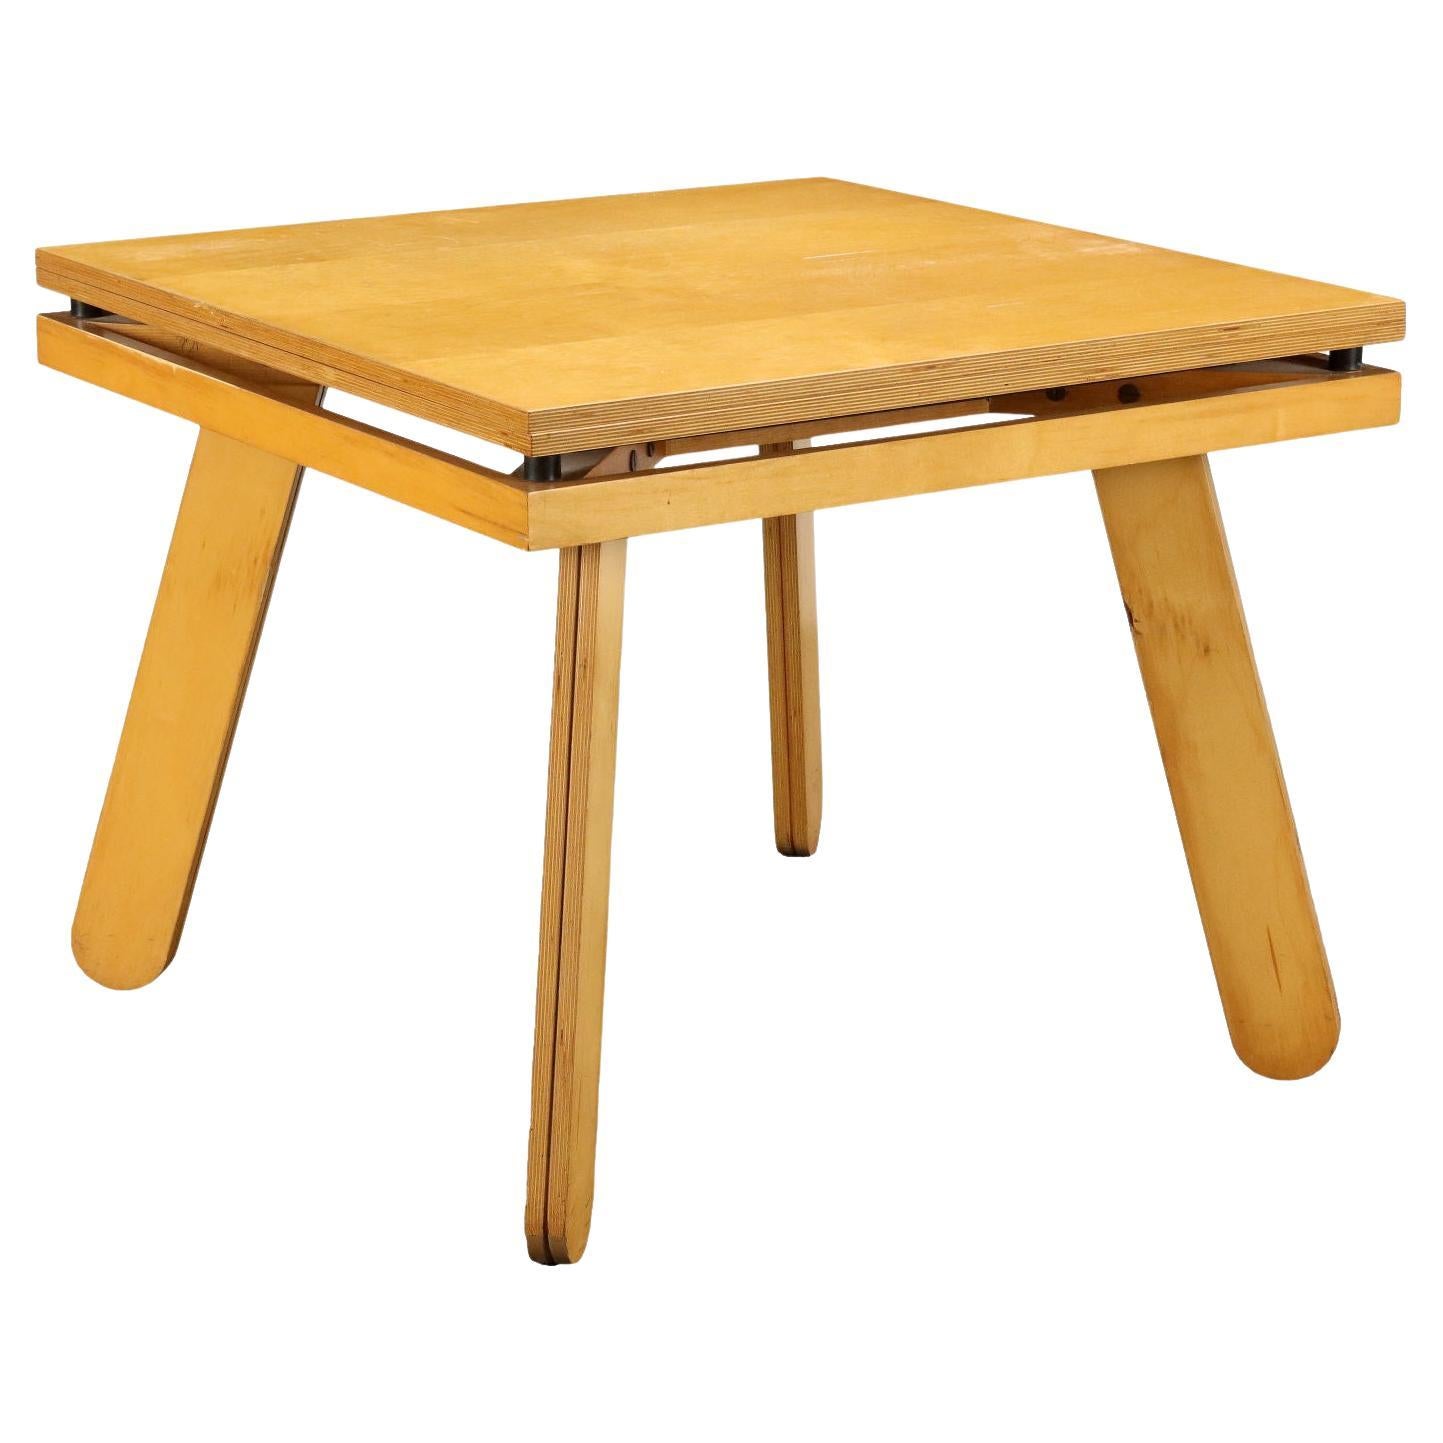 70s-80s table, made of light brown poplar wood For Sale